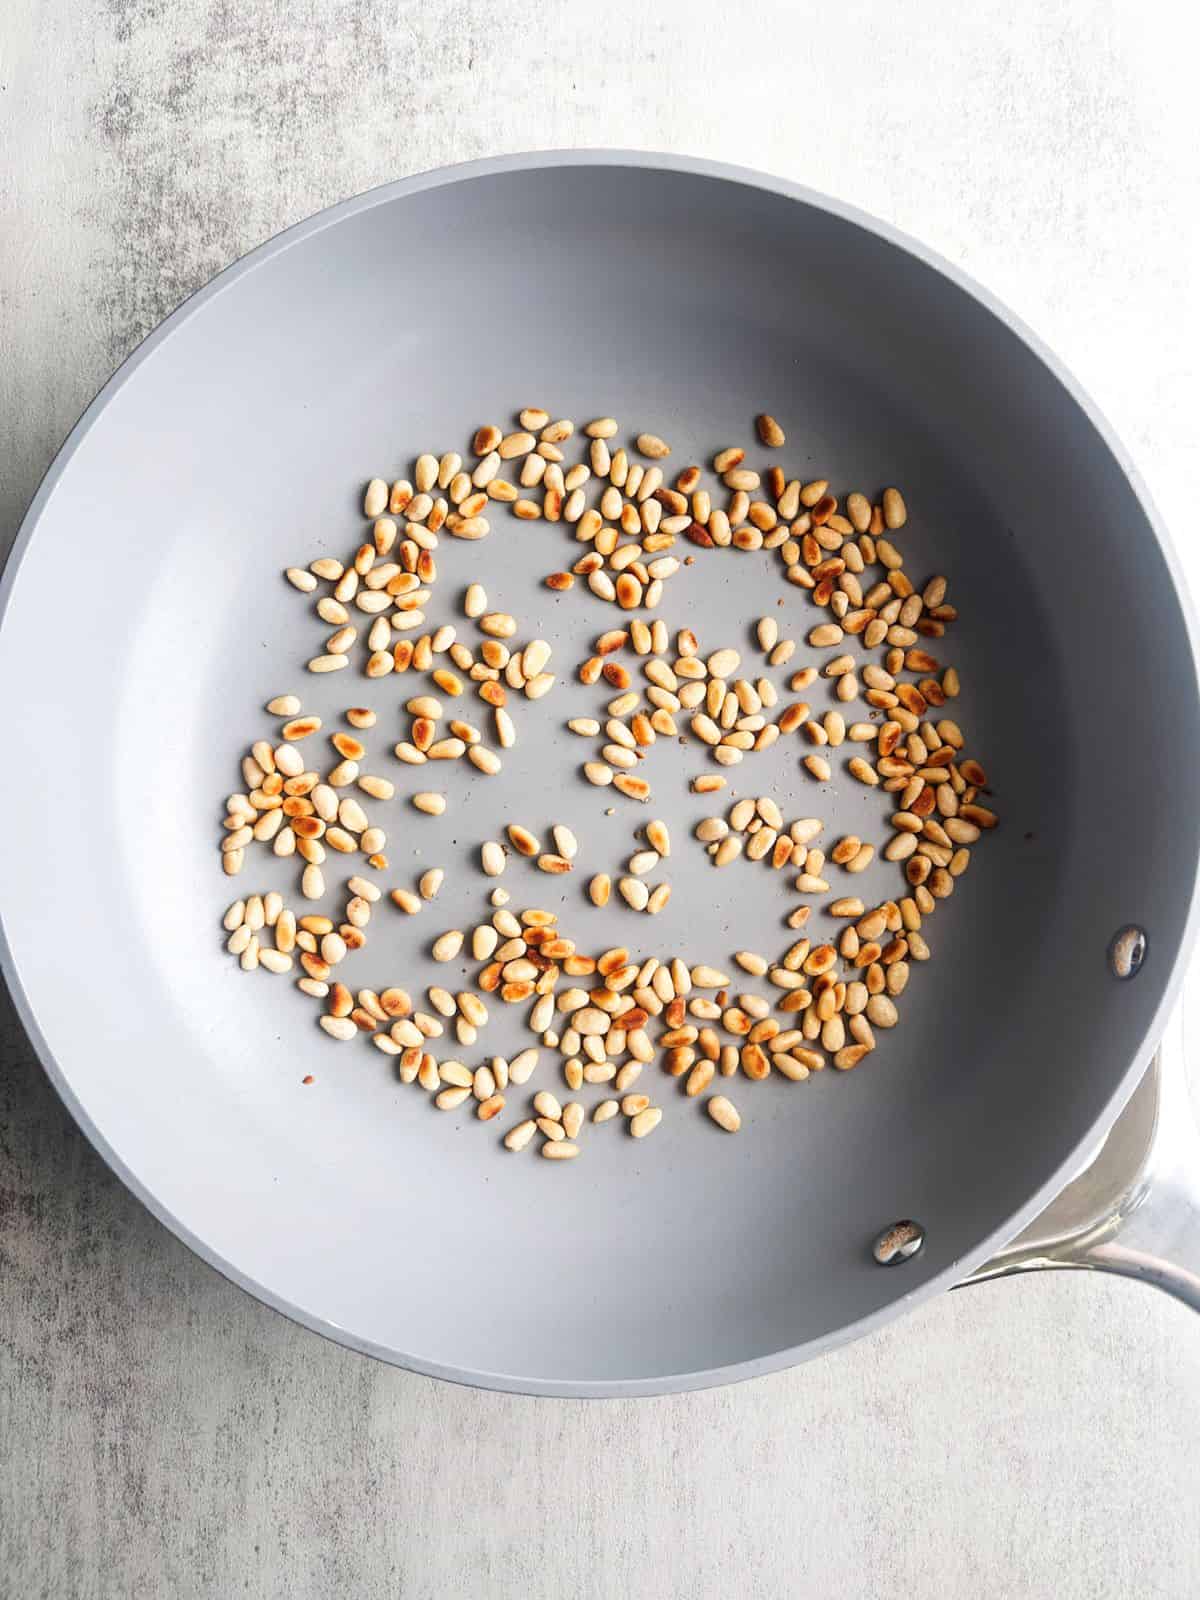 Toasted pine nuts in a skillet.